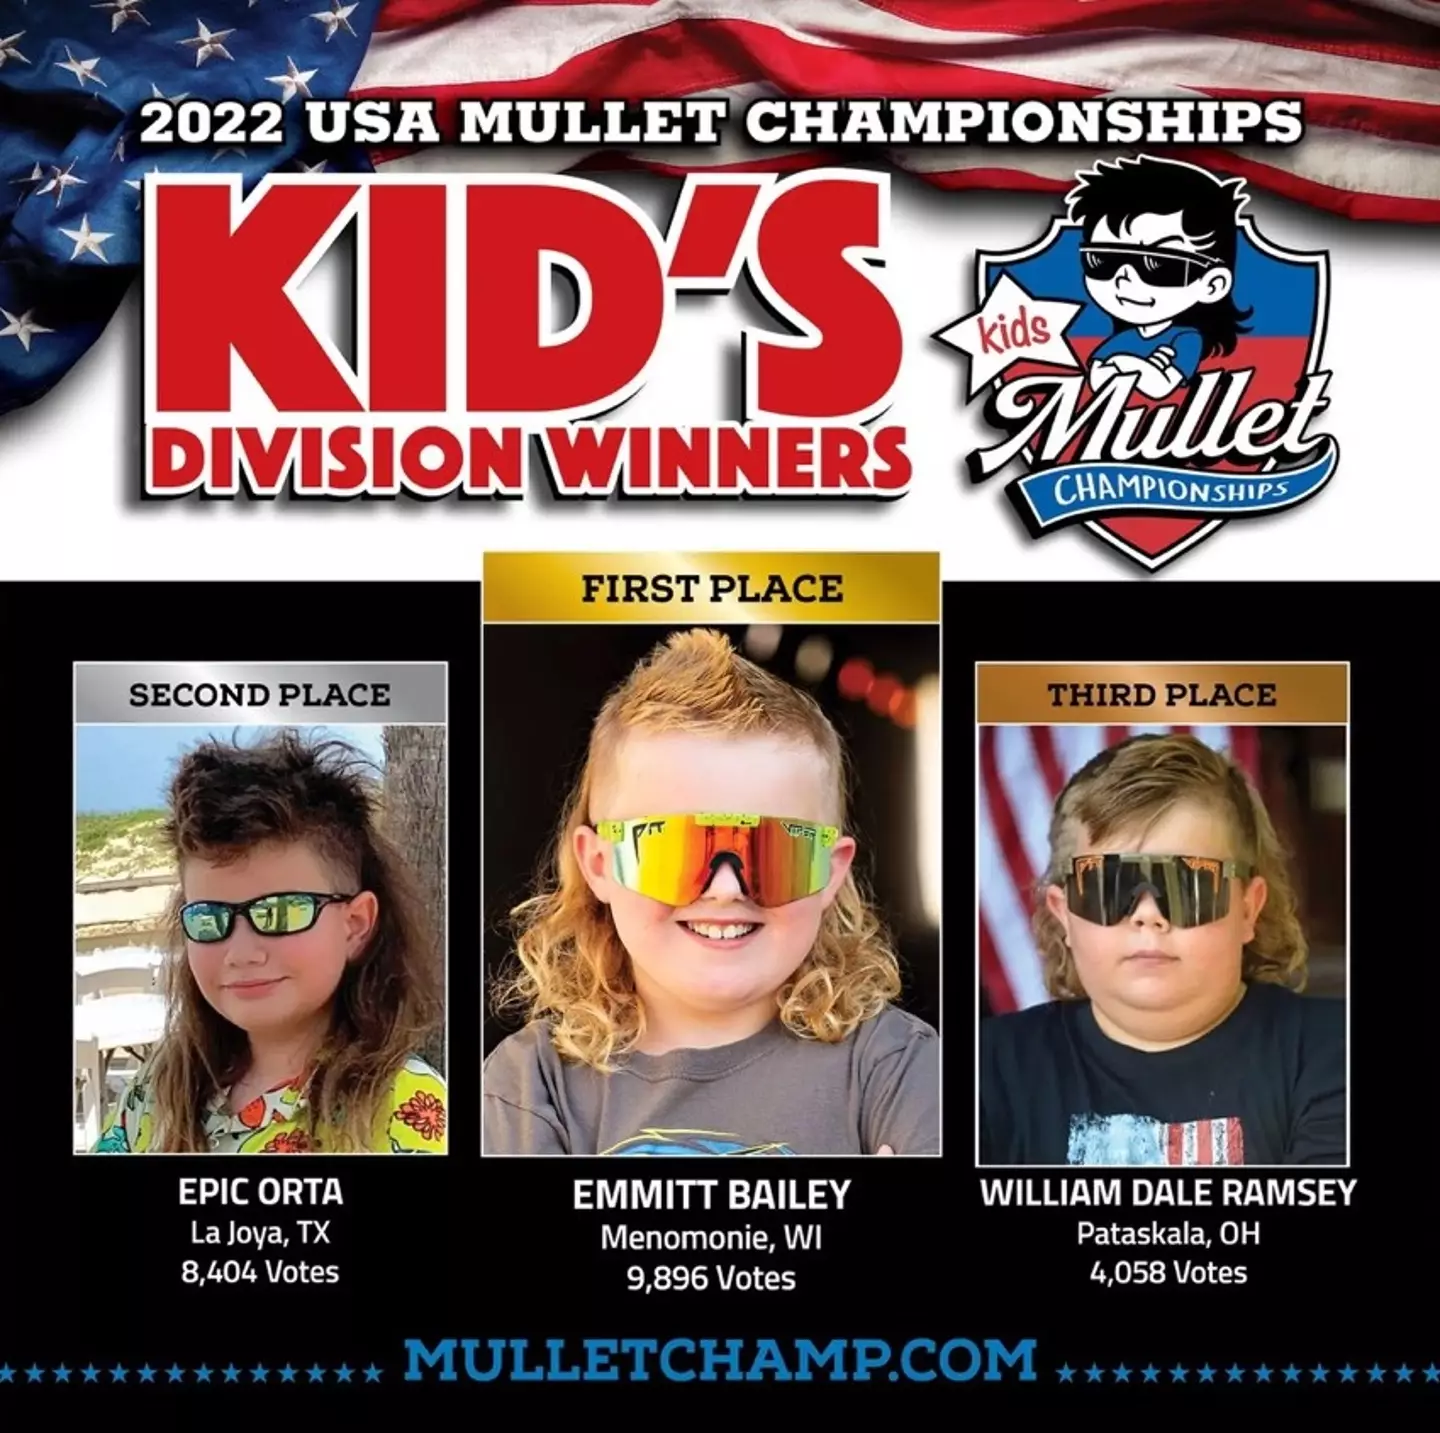 The kids with the best mullets in the US.